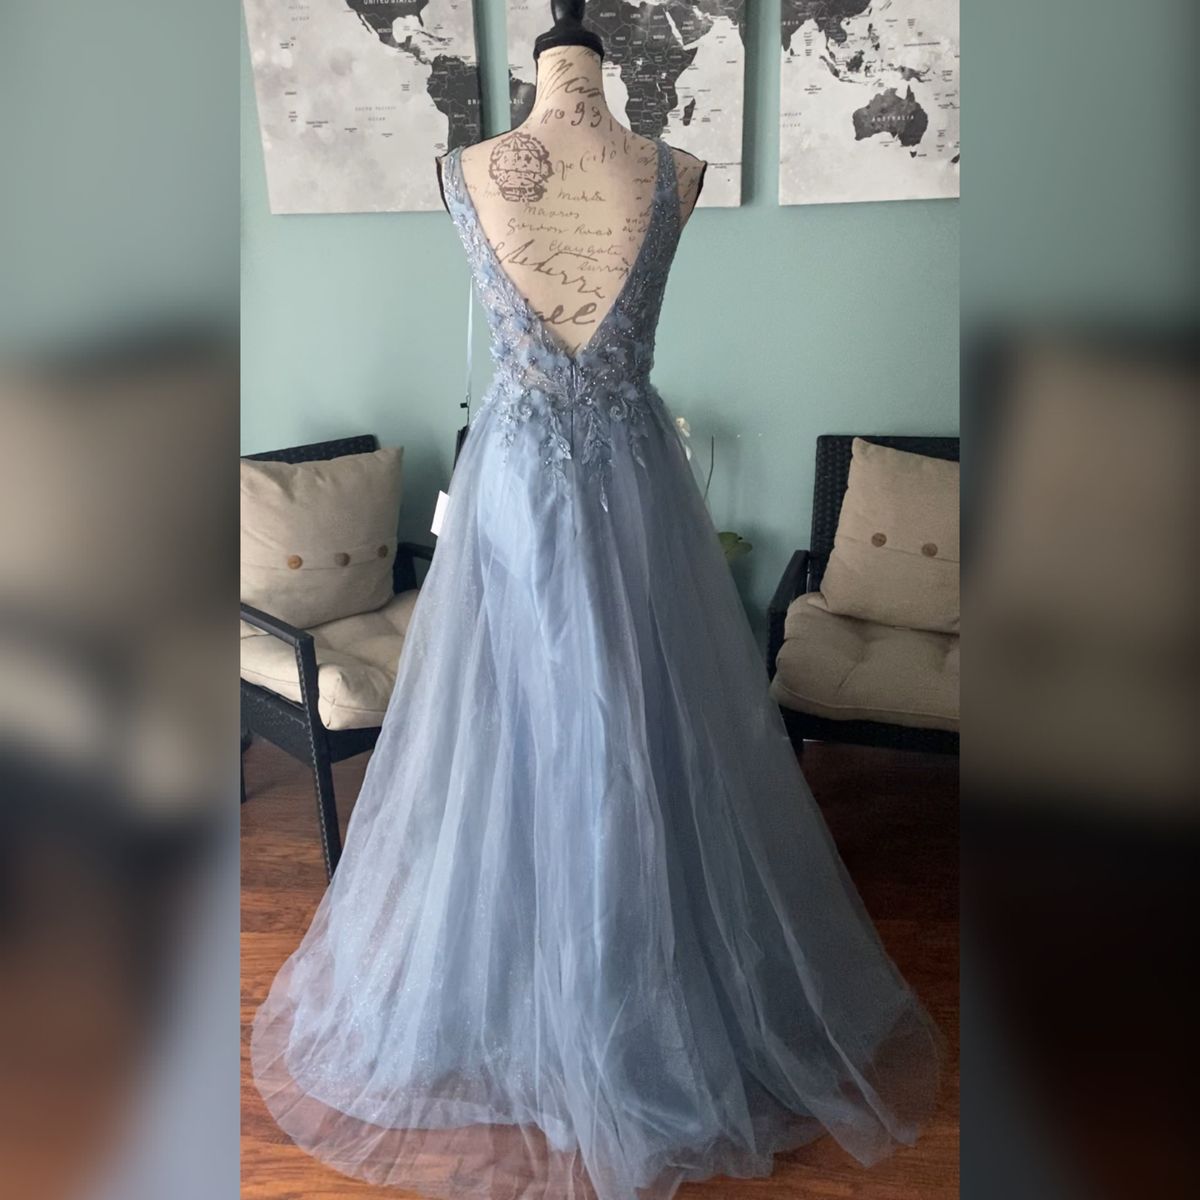 Blue Tulle Lace Mermaid Spaghetti Straps Prom Dress SP726